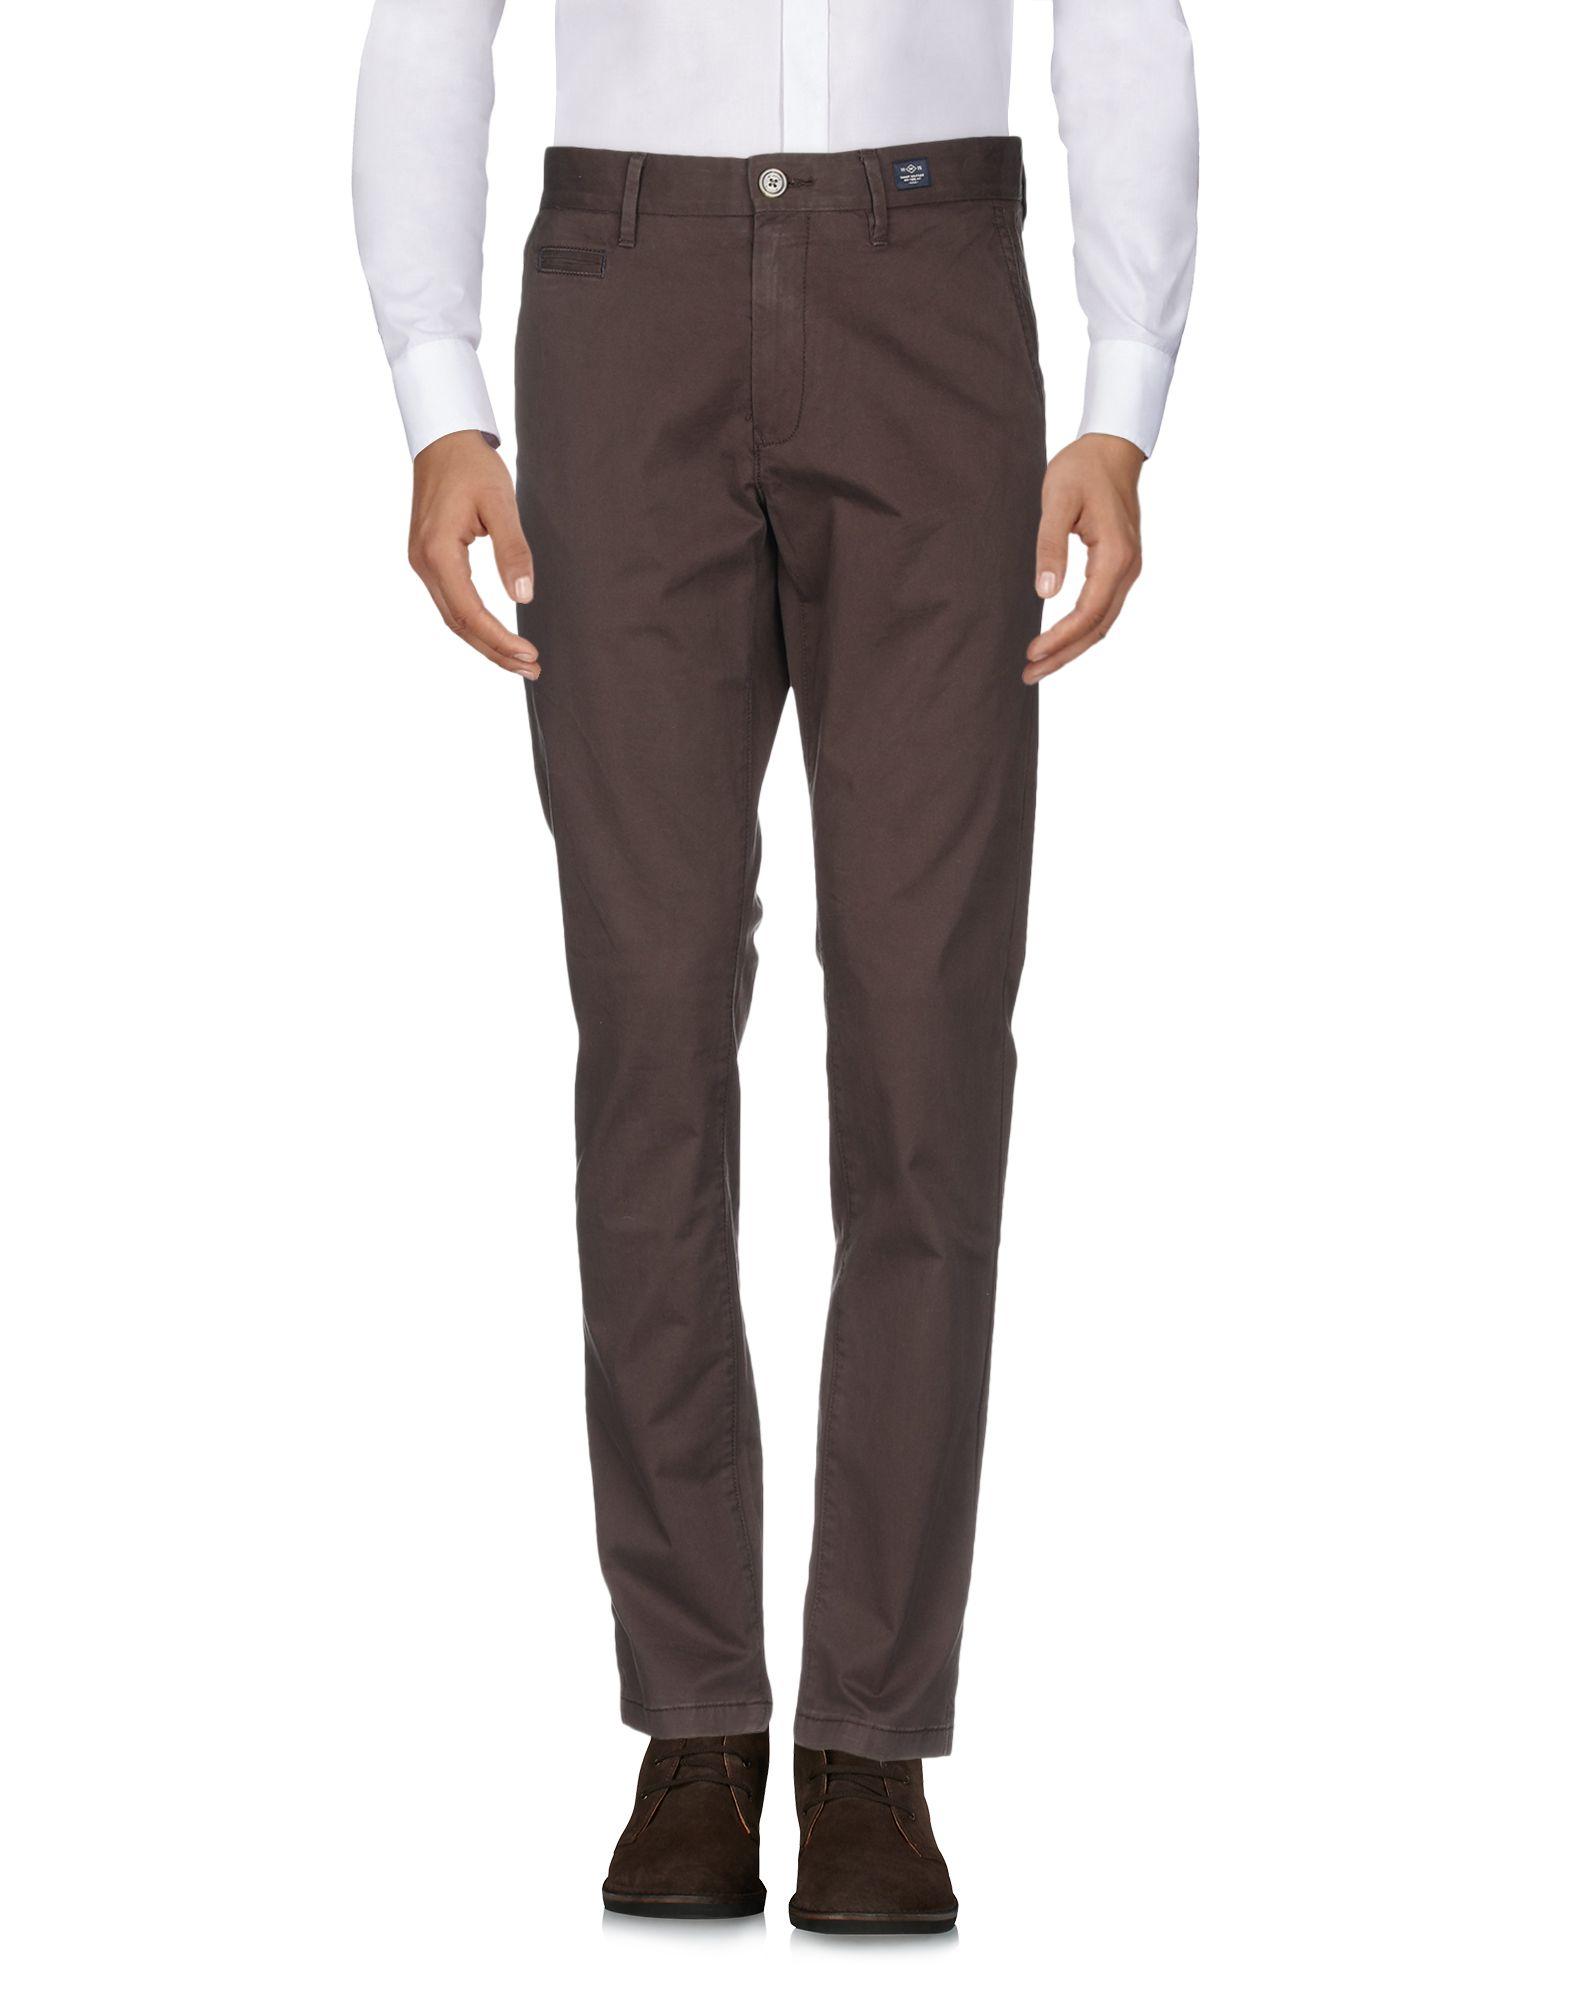 Tommy Hilfiger Cotton Casual Pants in Dark Brown (Brown) for Men - Lyst